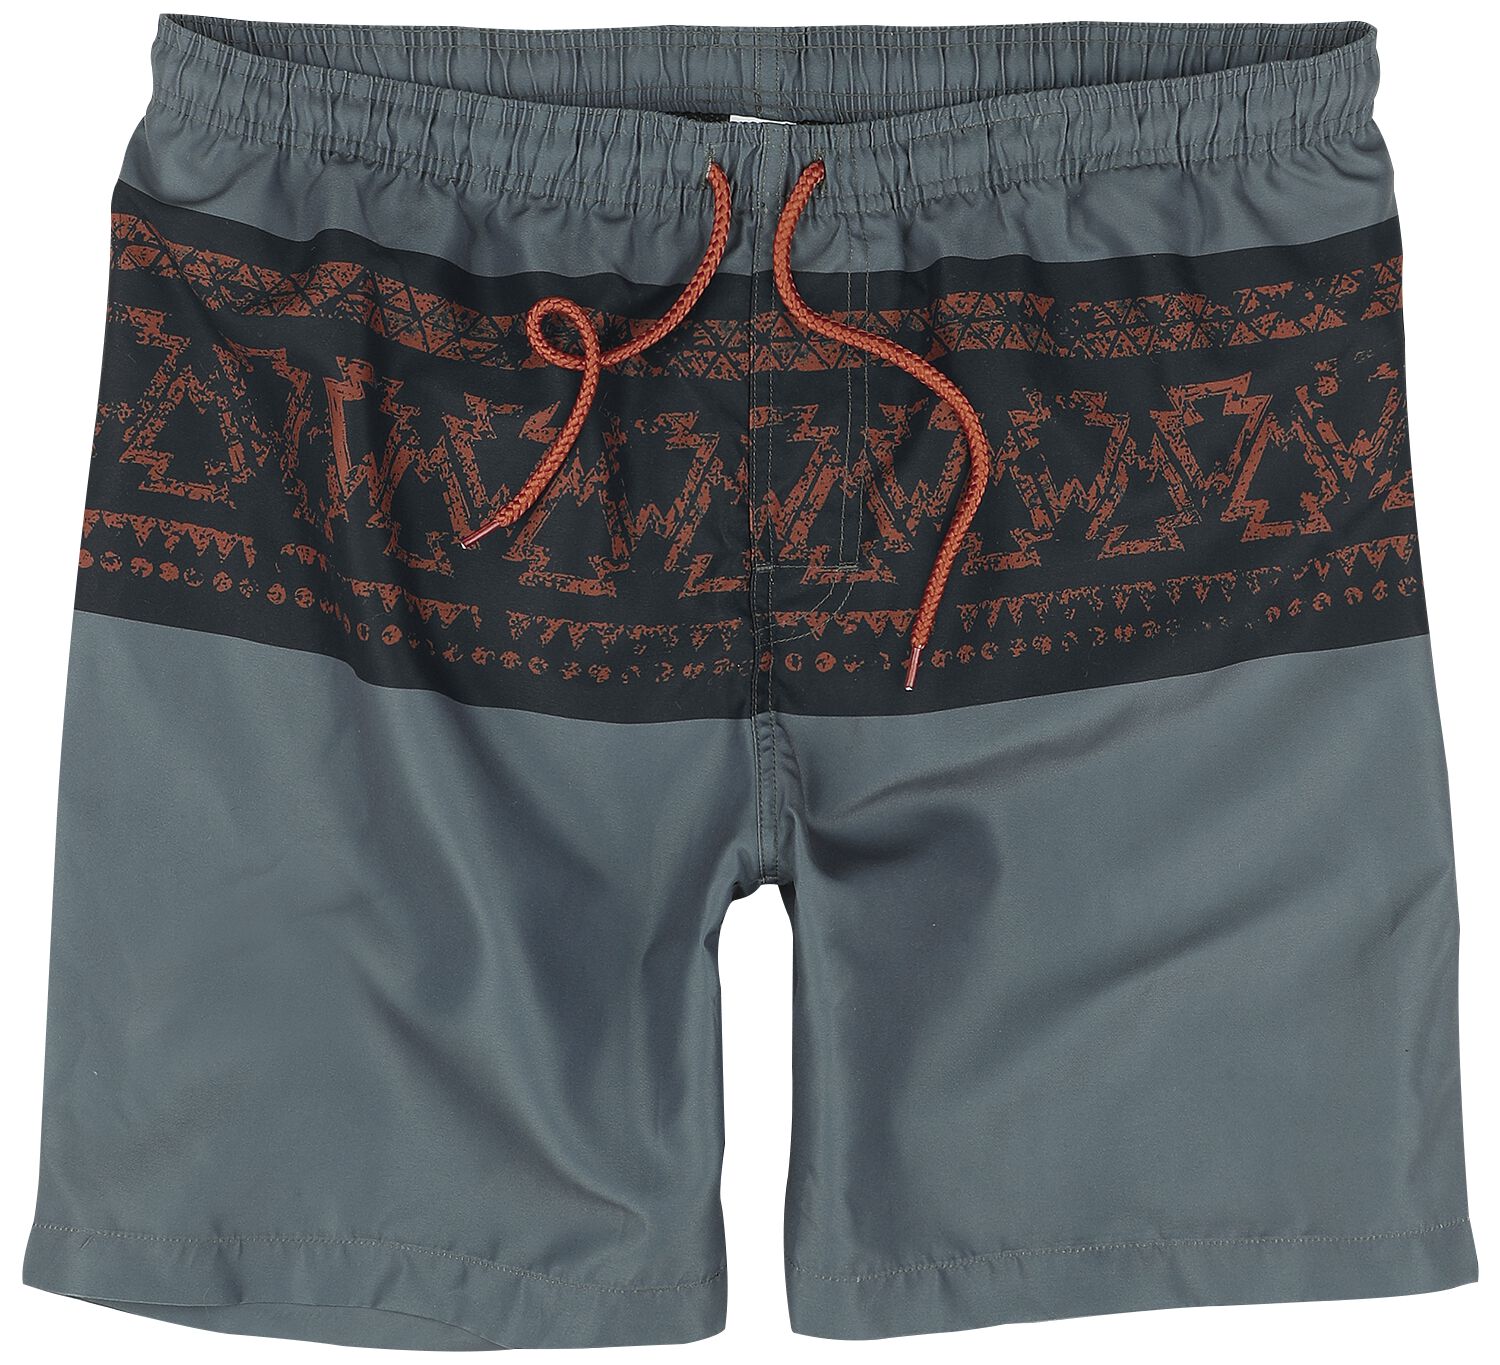 RED by EMP Swim Shorts With Graphic Design Badeshort dunkelgrau in M